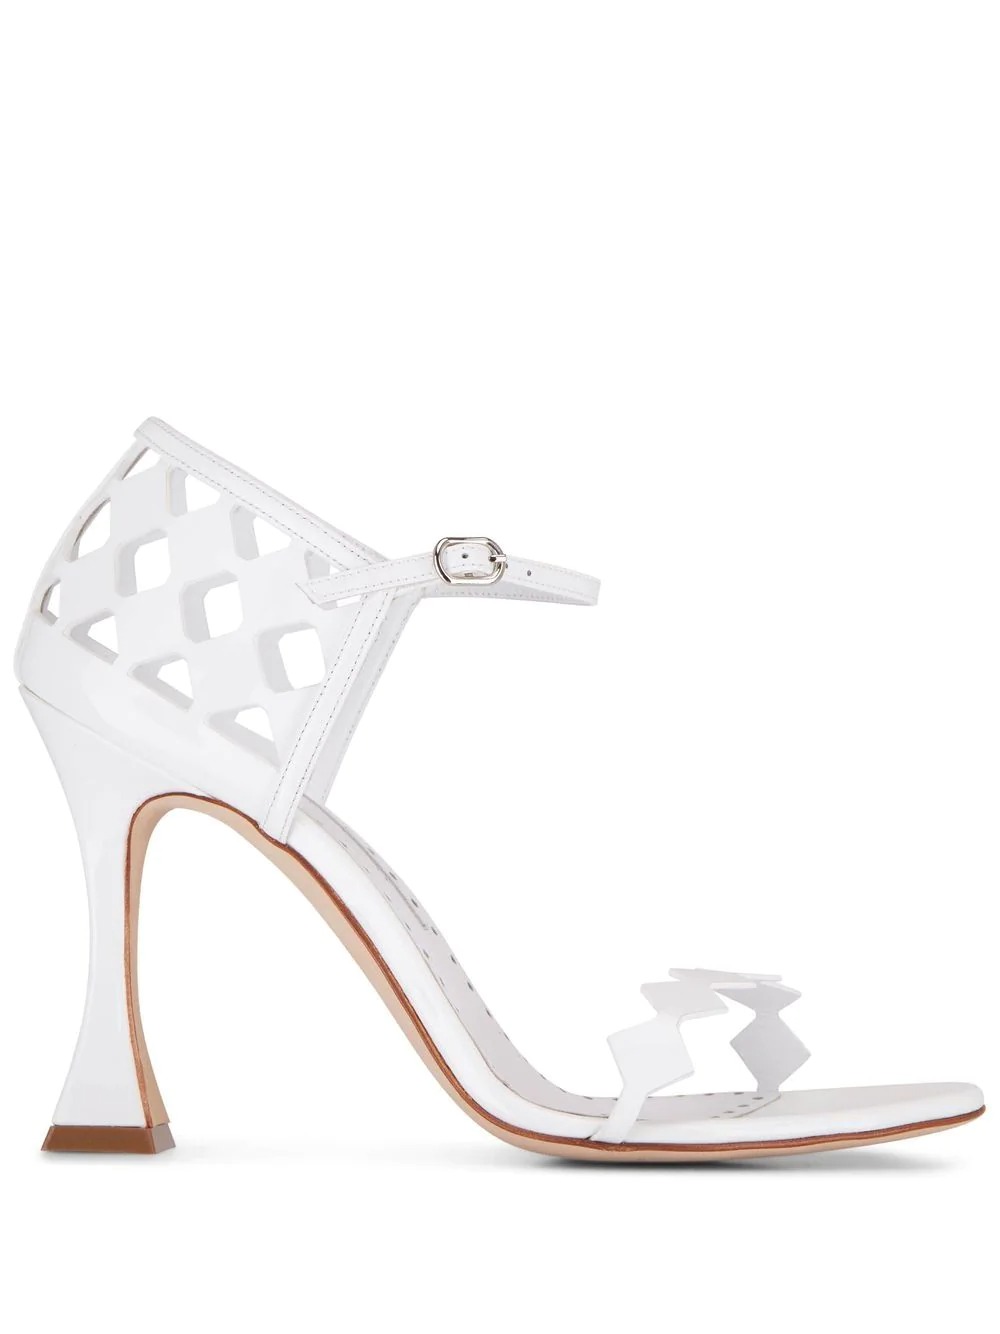 thick heeled designer sandals that would be good for a garden wedding